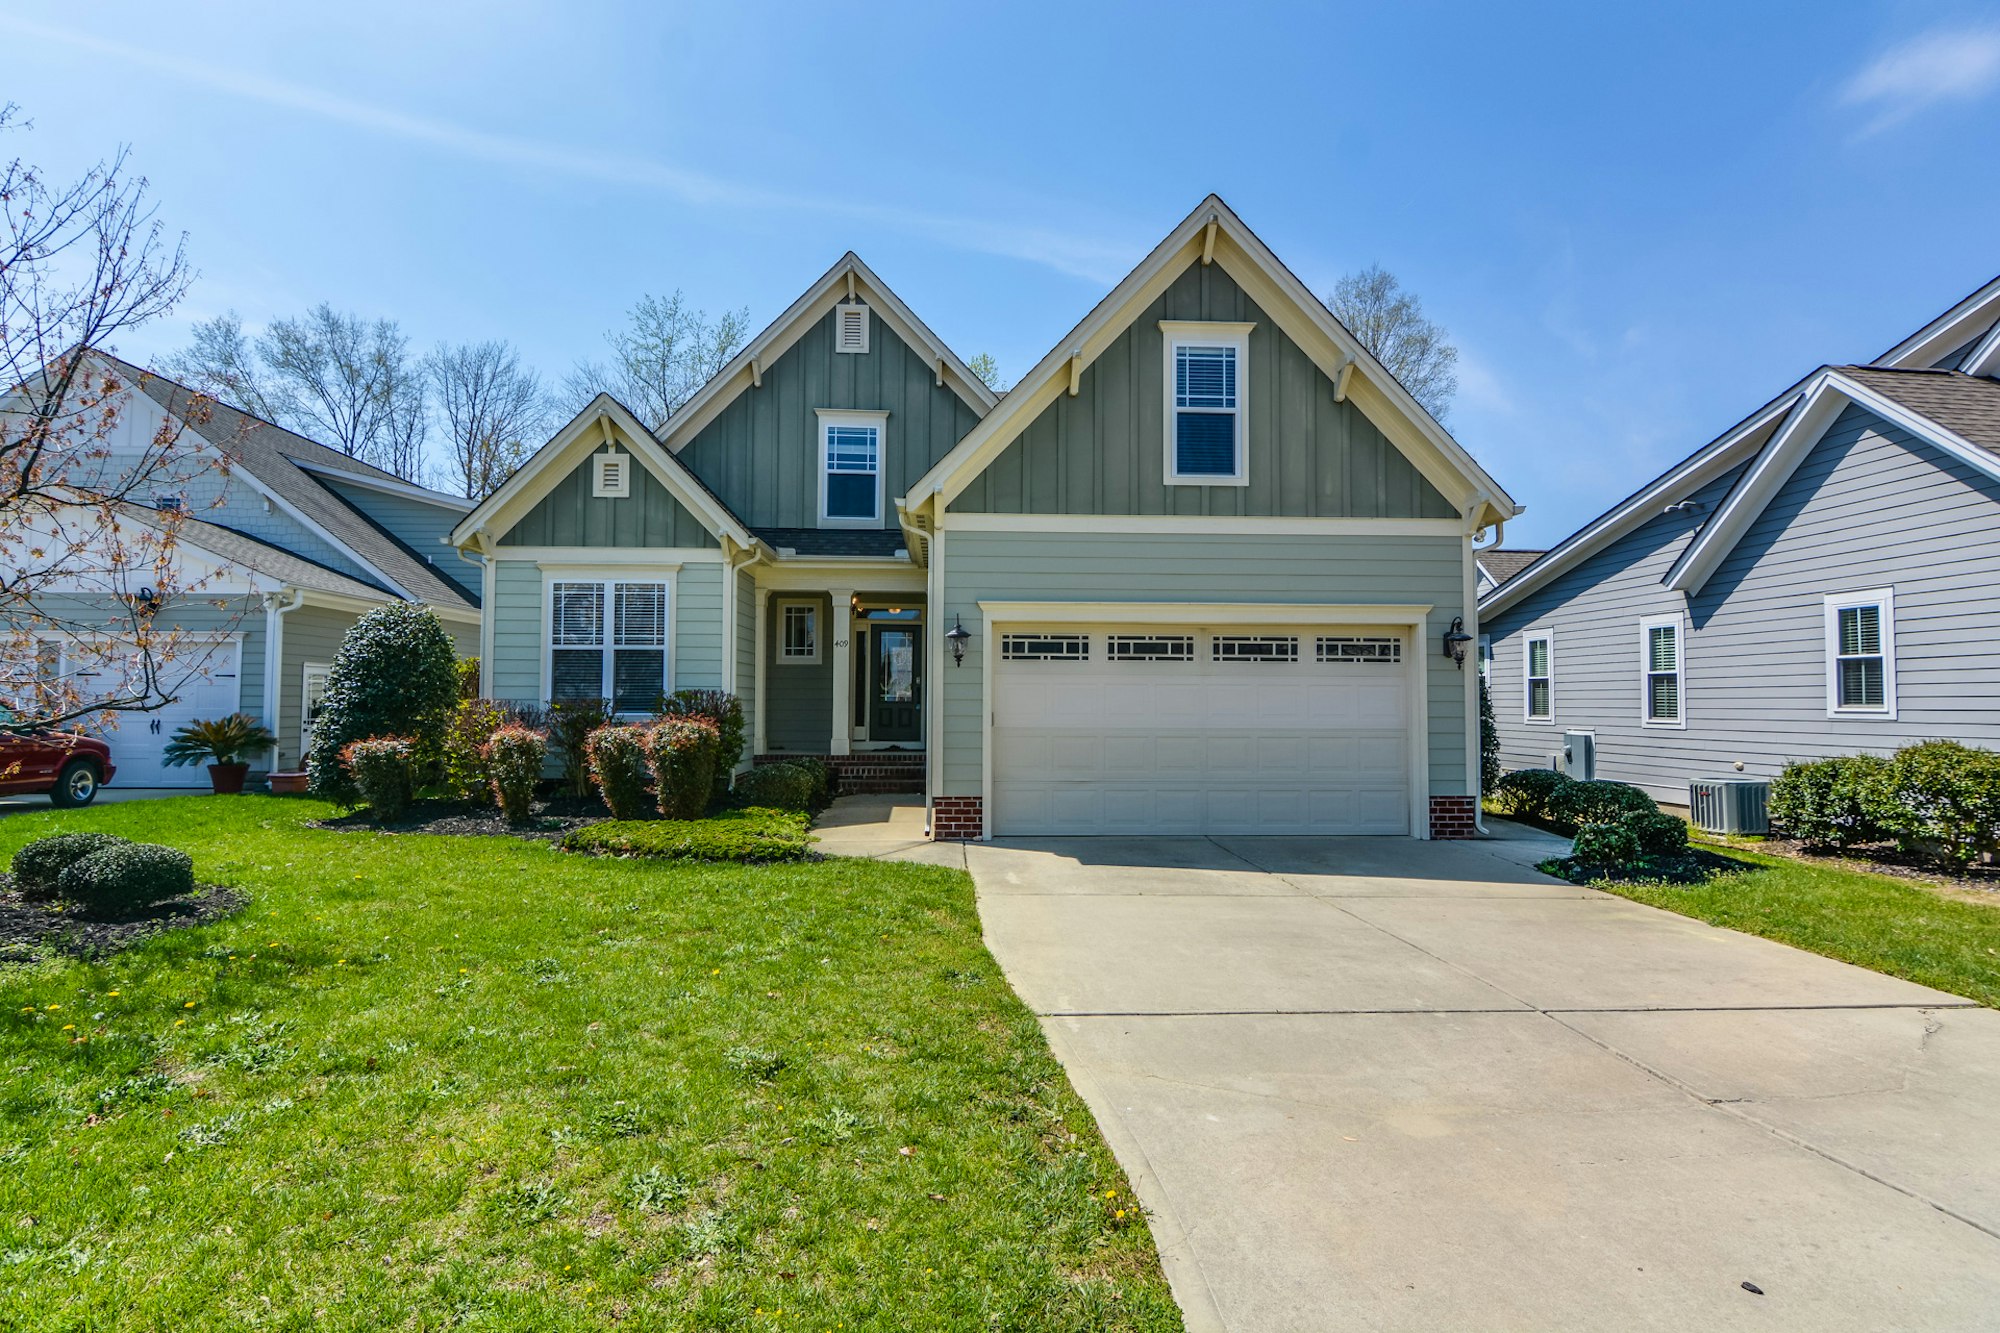 Photo 1 of 34 - 409 Beckwith Ave, Clayton, NC 27527